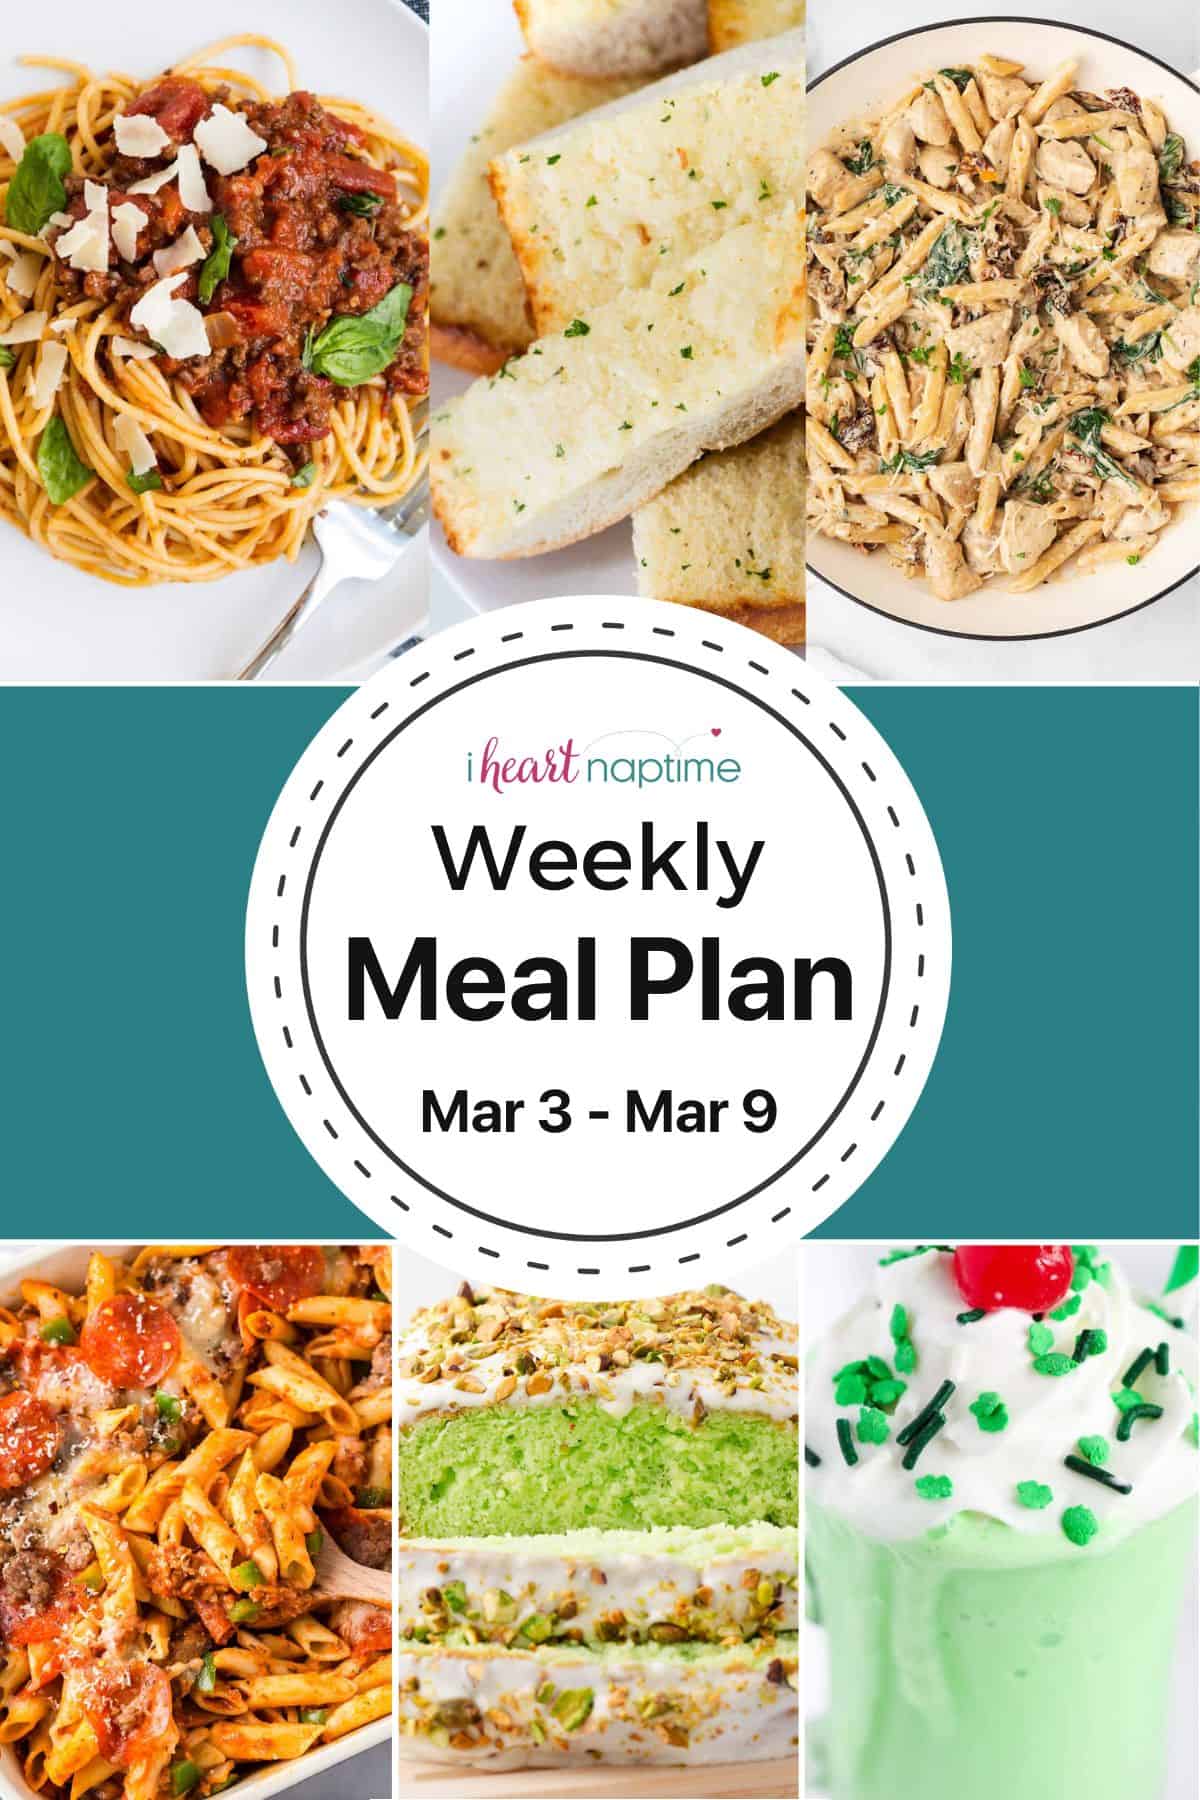 Photos of recipes for a weekly meal plan from I Heart Naptime.